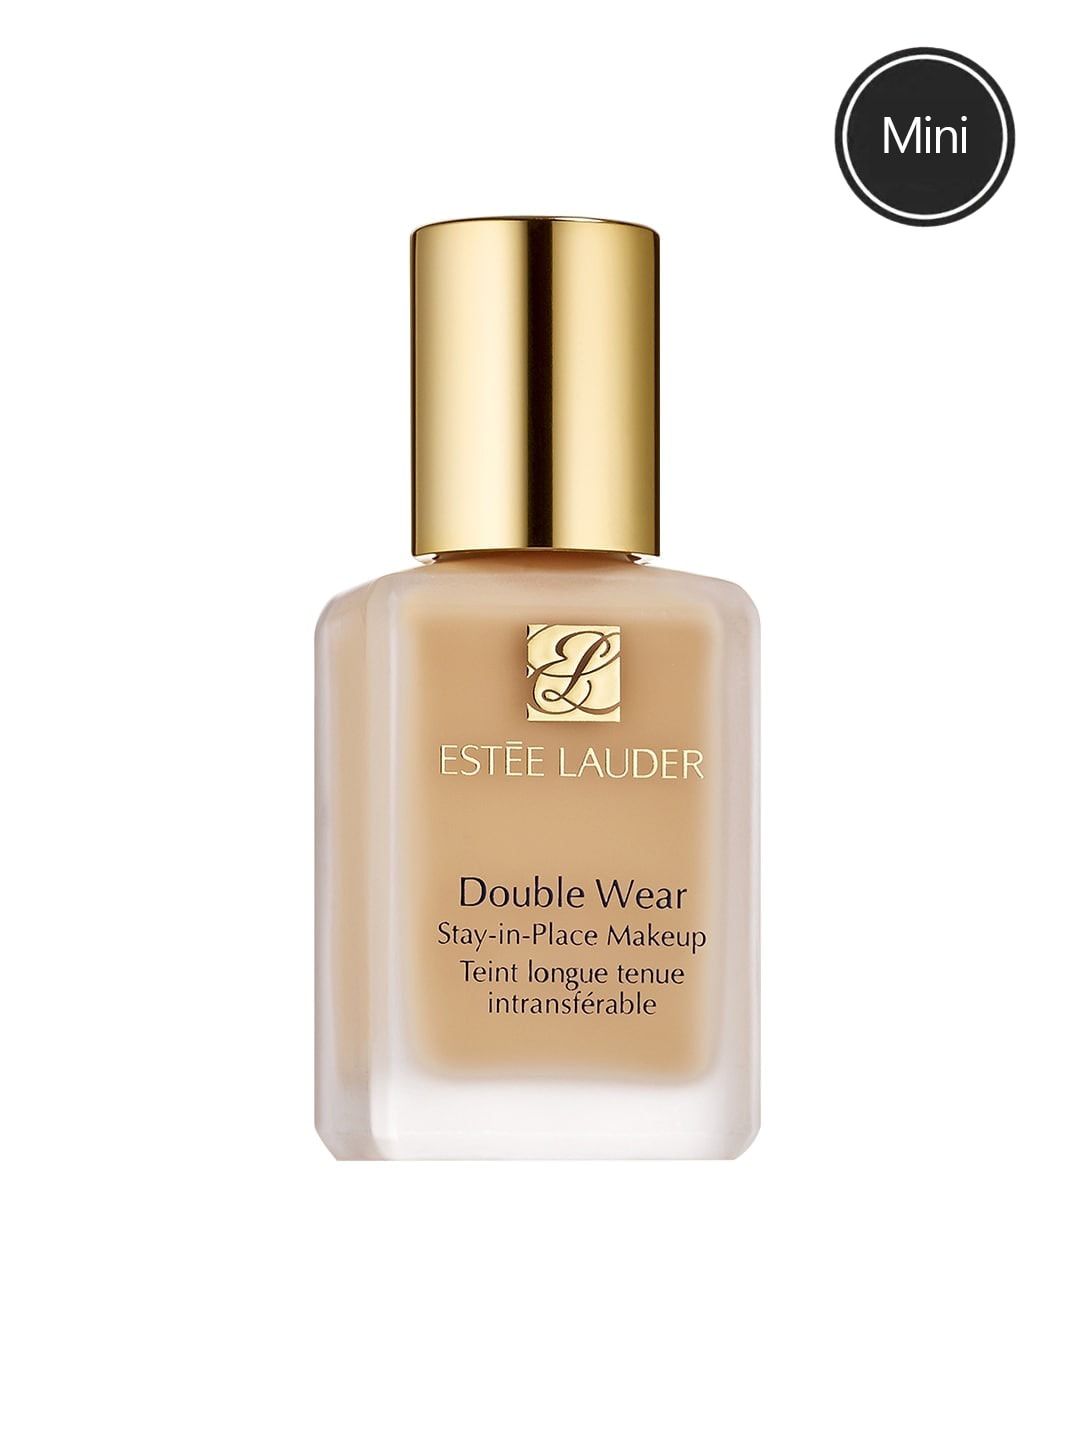 Estee Lauder Double Wear Stay-In-Place Makeup with SPF 10 - Sand 1W2 15ml Price in India